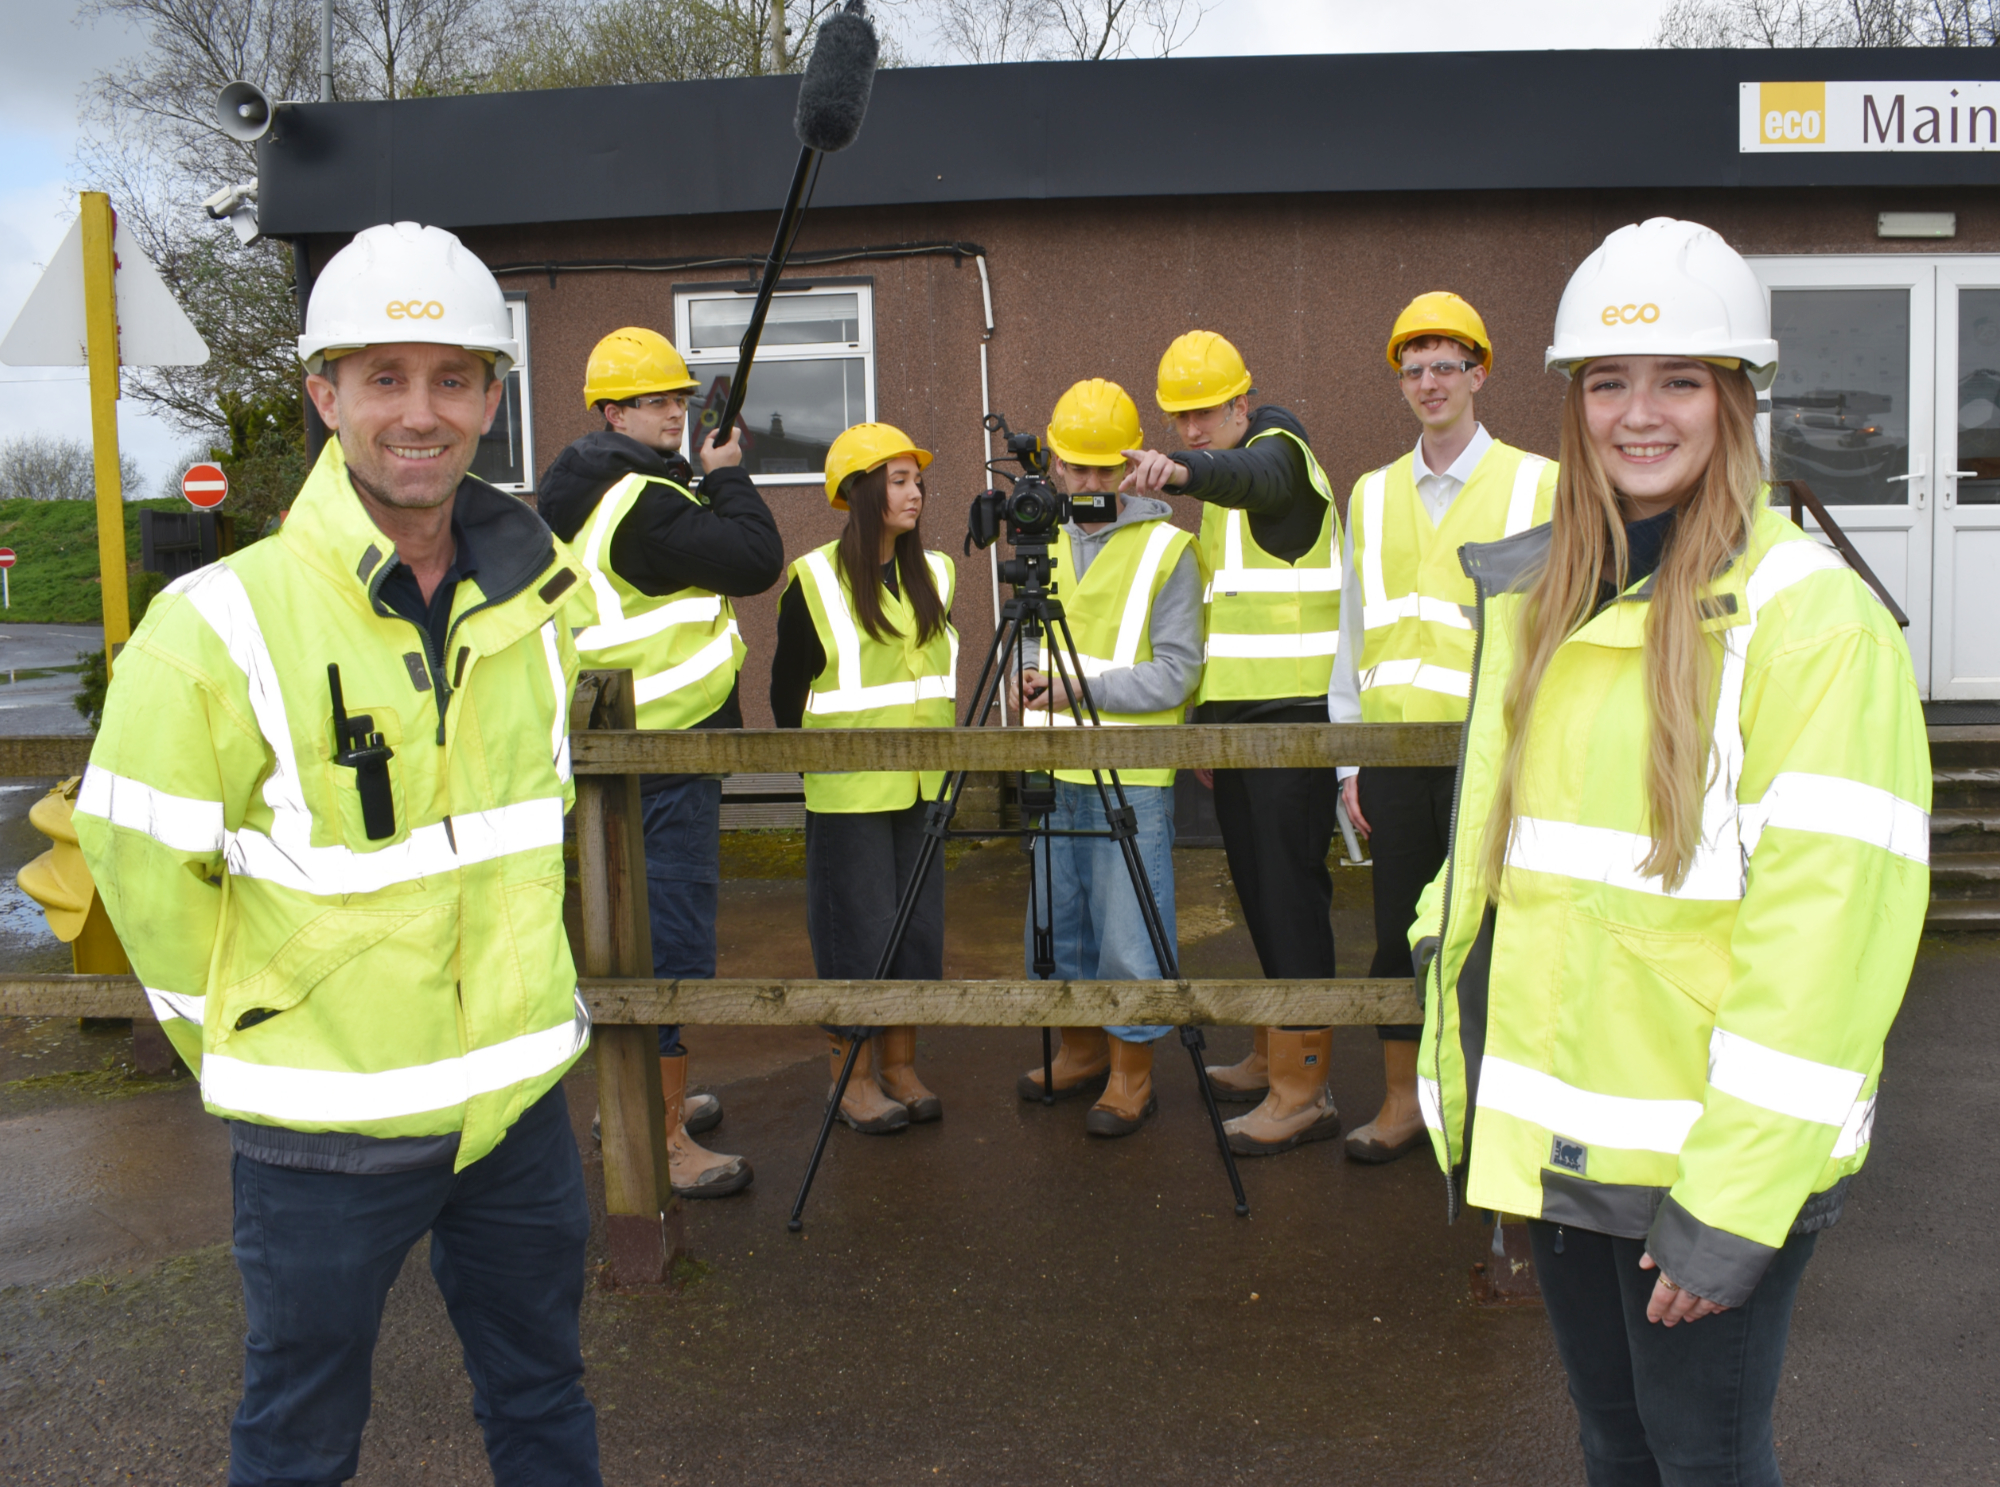 Students and team members stood at Eco site filming